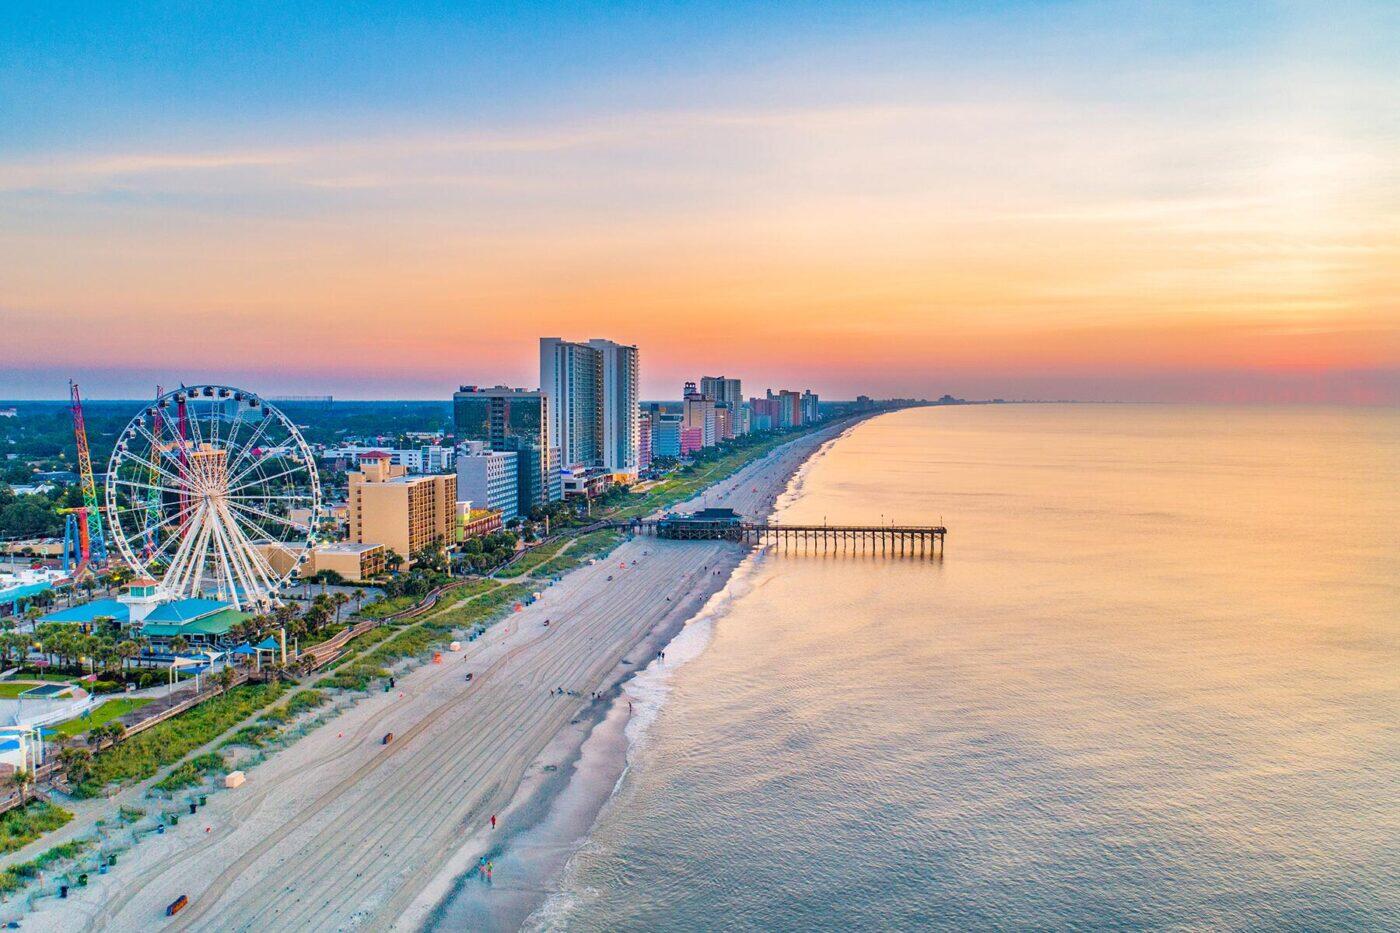 The Perfect 3Day Weekend Road Trip Itinerary to Myrtle Beach, South